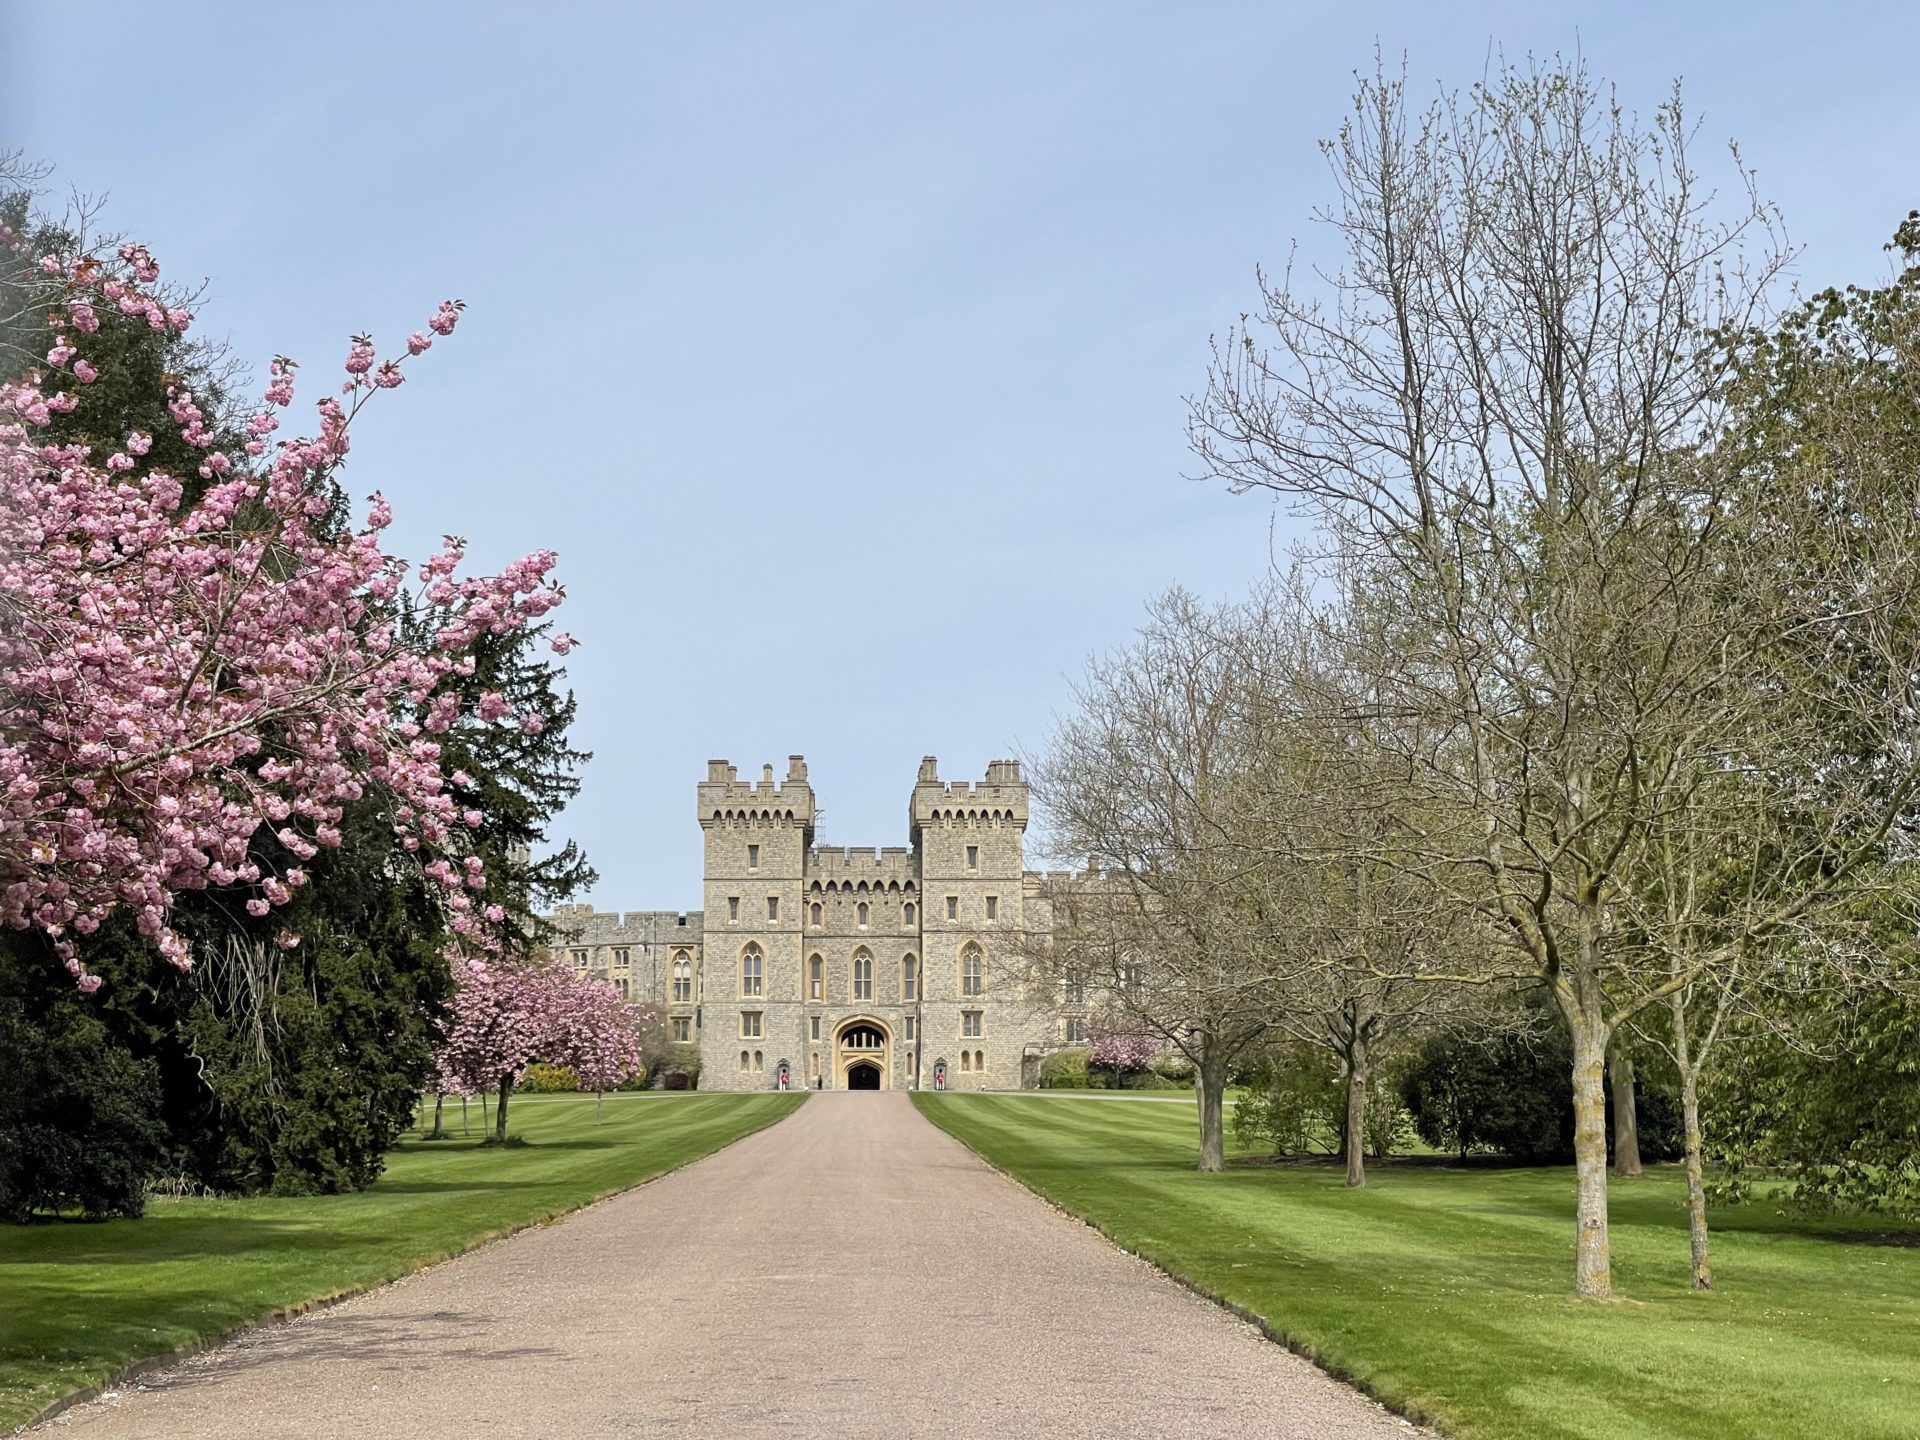 Windsor Day Trip from London, England – Travel Guide, Things to Do, How to Get There, Tours, & More